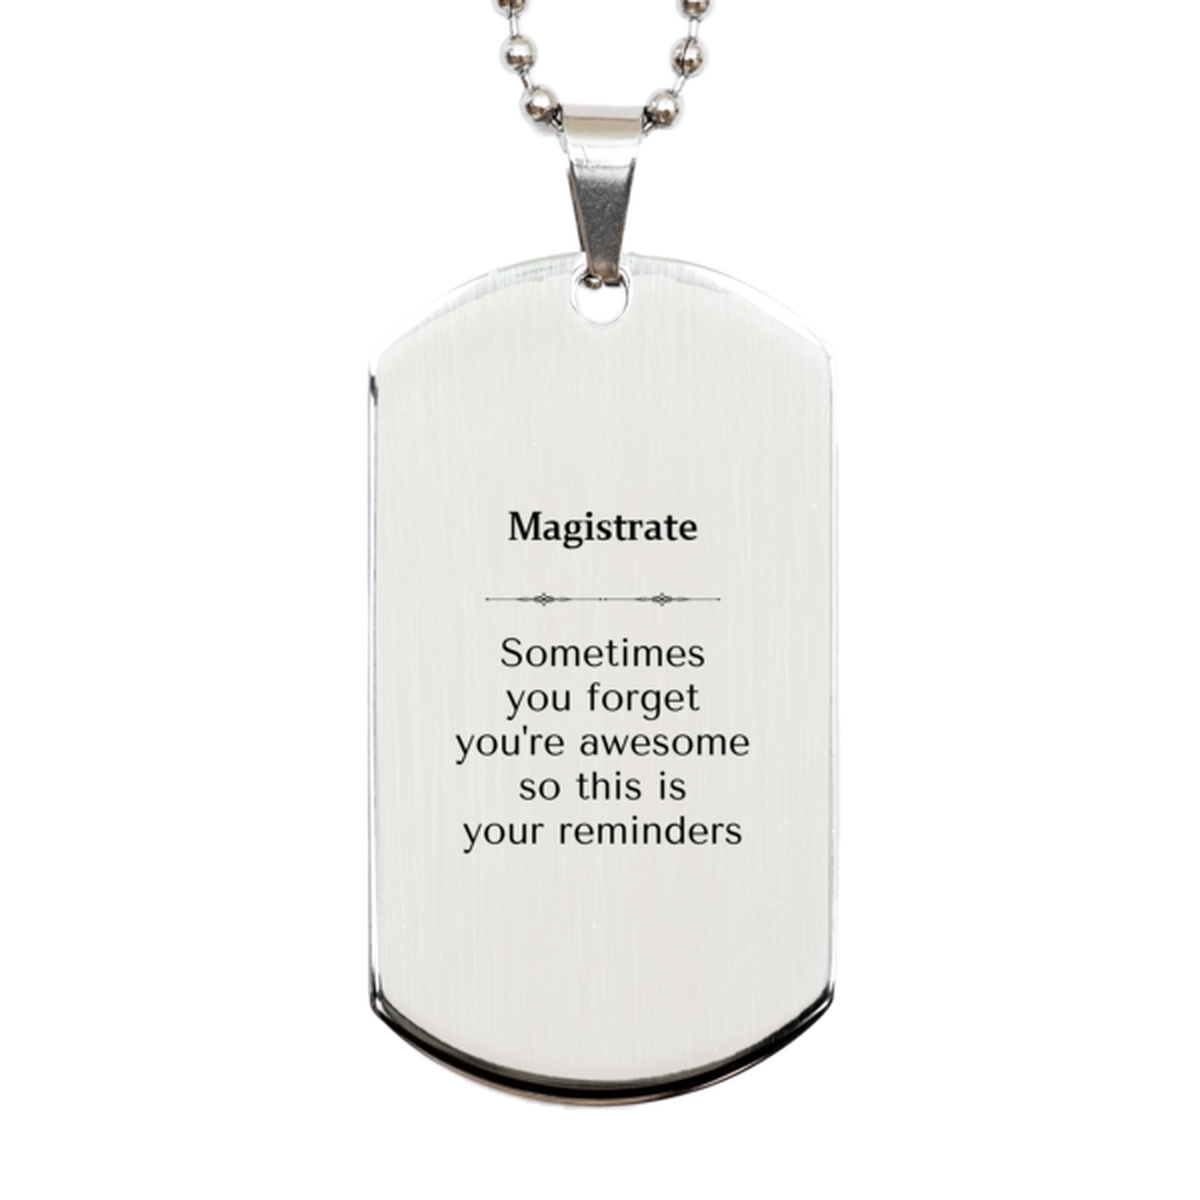 Sentimental Magistrate Silver Dog Tag, Magistrate Sometimes you forget you're awesome so this is your reminders, Graduation Christmas Birthday Gifts for Magistrate, Men, Women, Coworkers